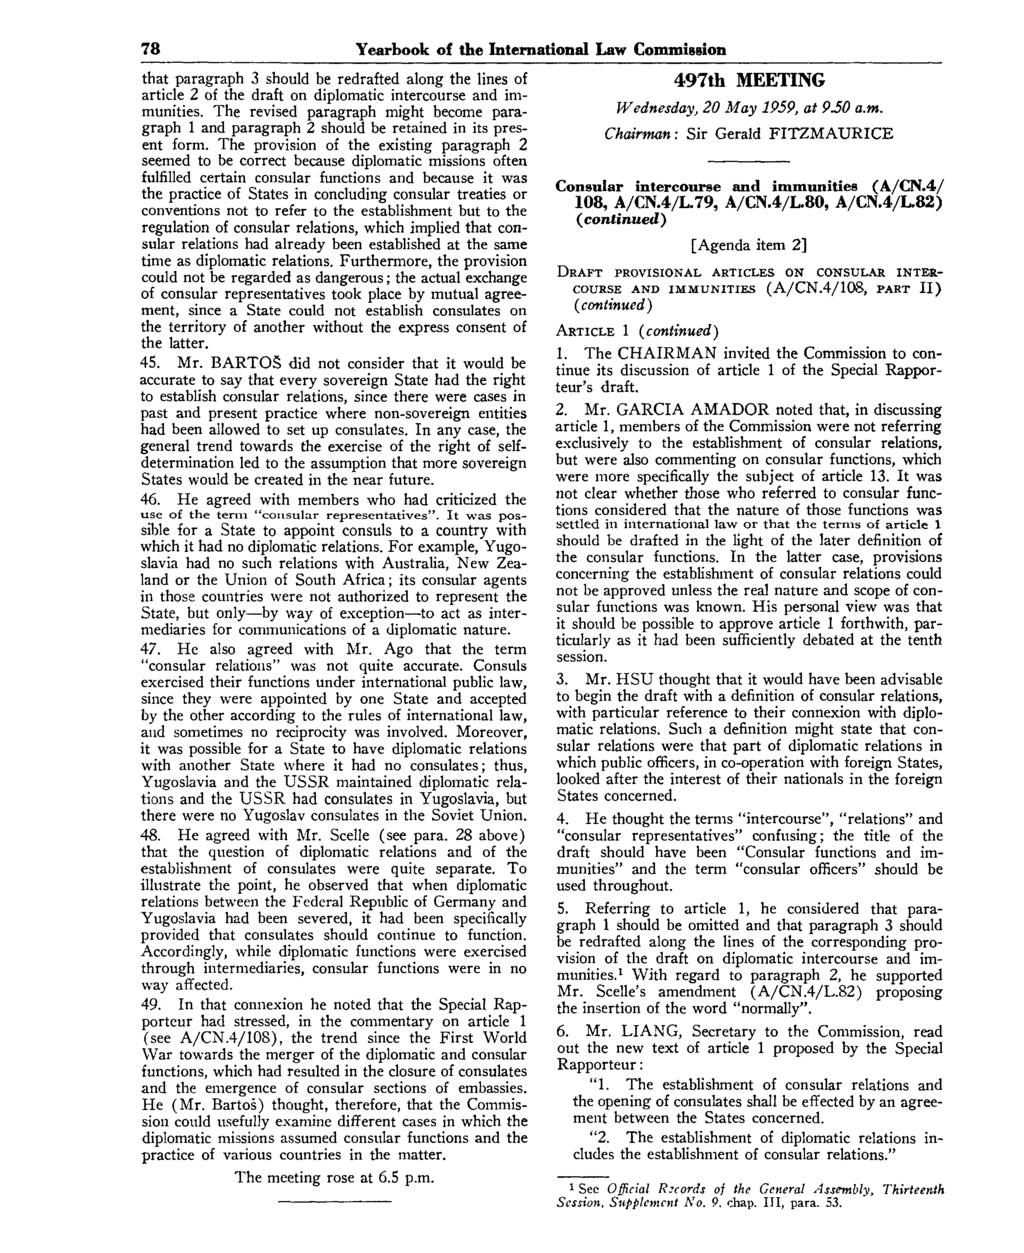 78 Yearbook of the International Law Commiggion that paragraph 3 should be redrafted along the lines of article 2 of the draft on diplomatic intercourse and immunities.